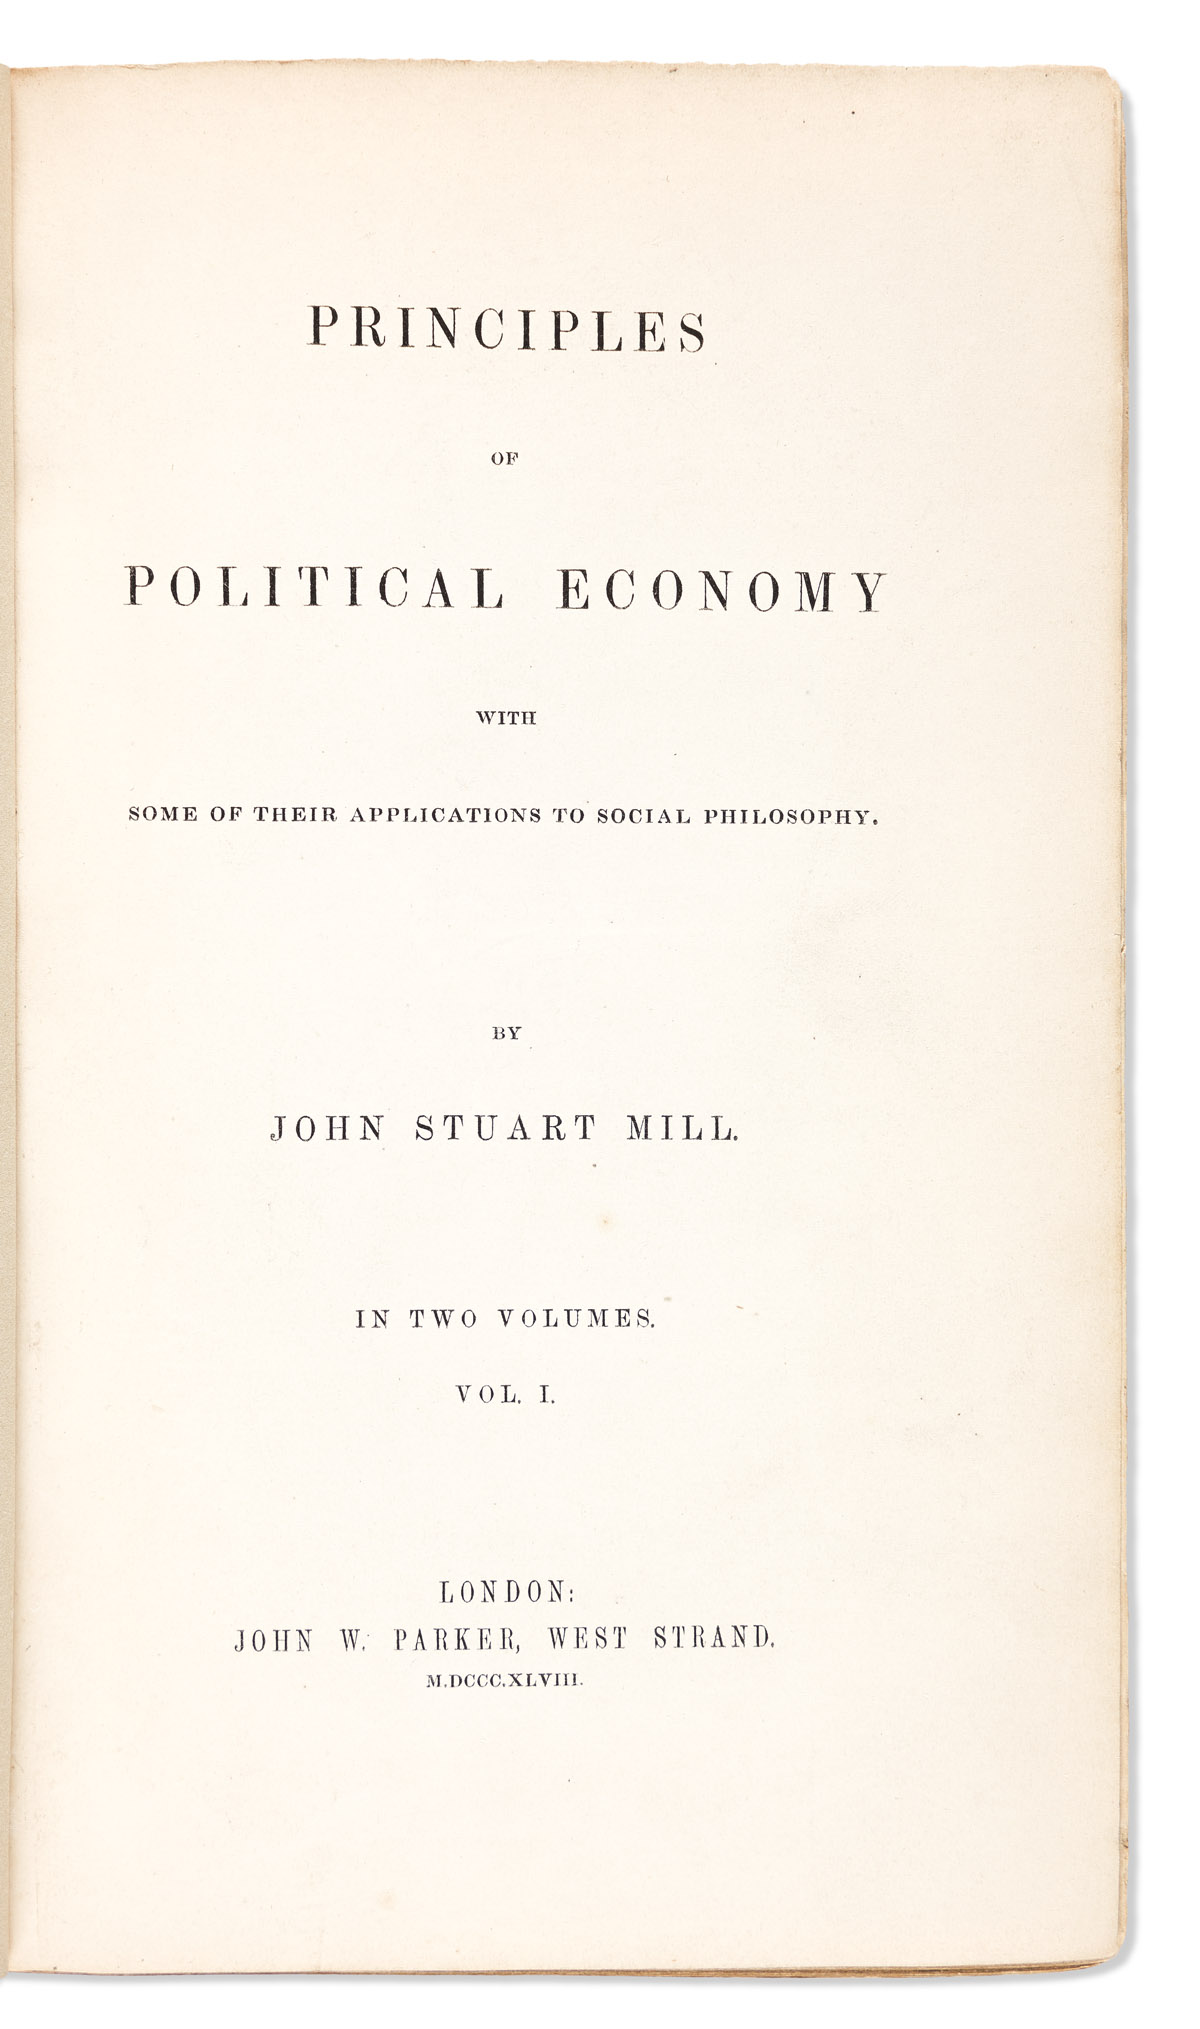 [Economics] Mill, John Stuart (1806-1873) Principles of Political Economy with Some of their Applications to Social Philosophy.